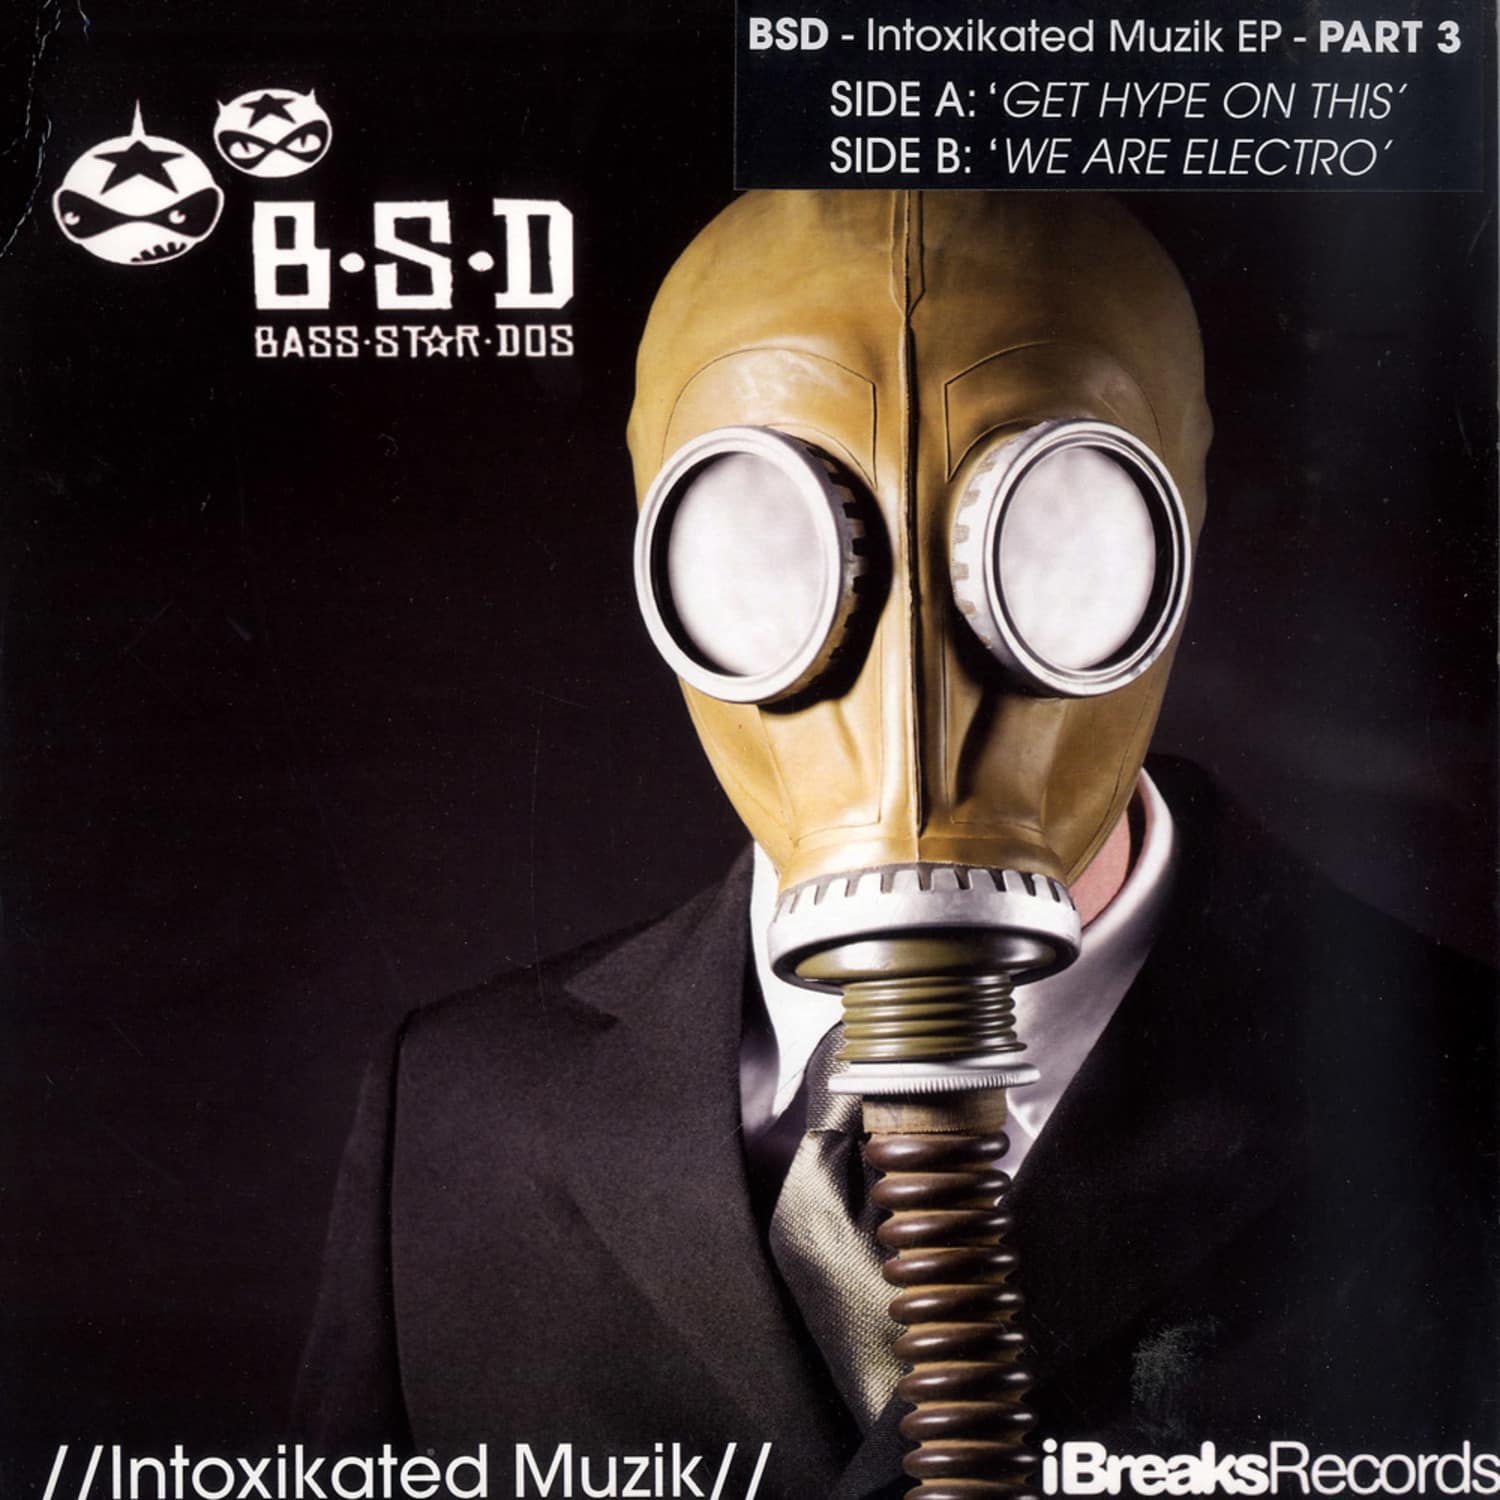 B.S.D. - GET HYPE ON / WE ARE ELECTRO